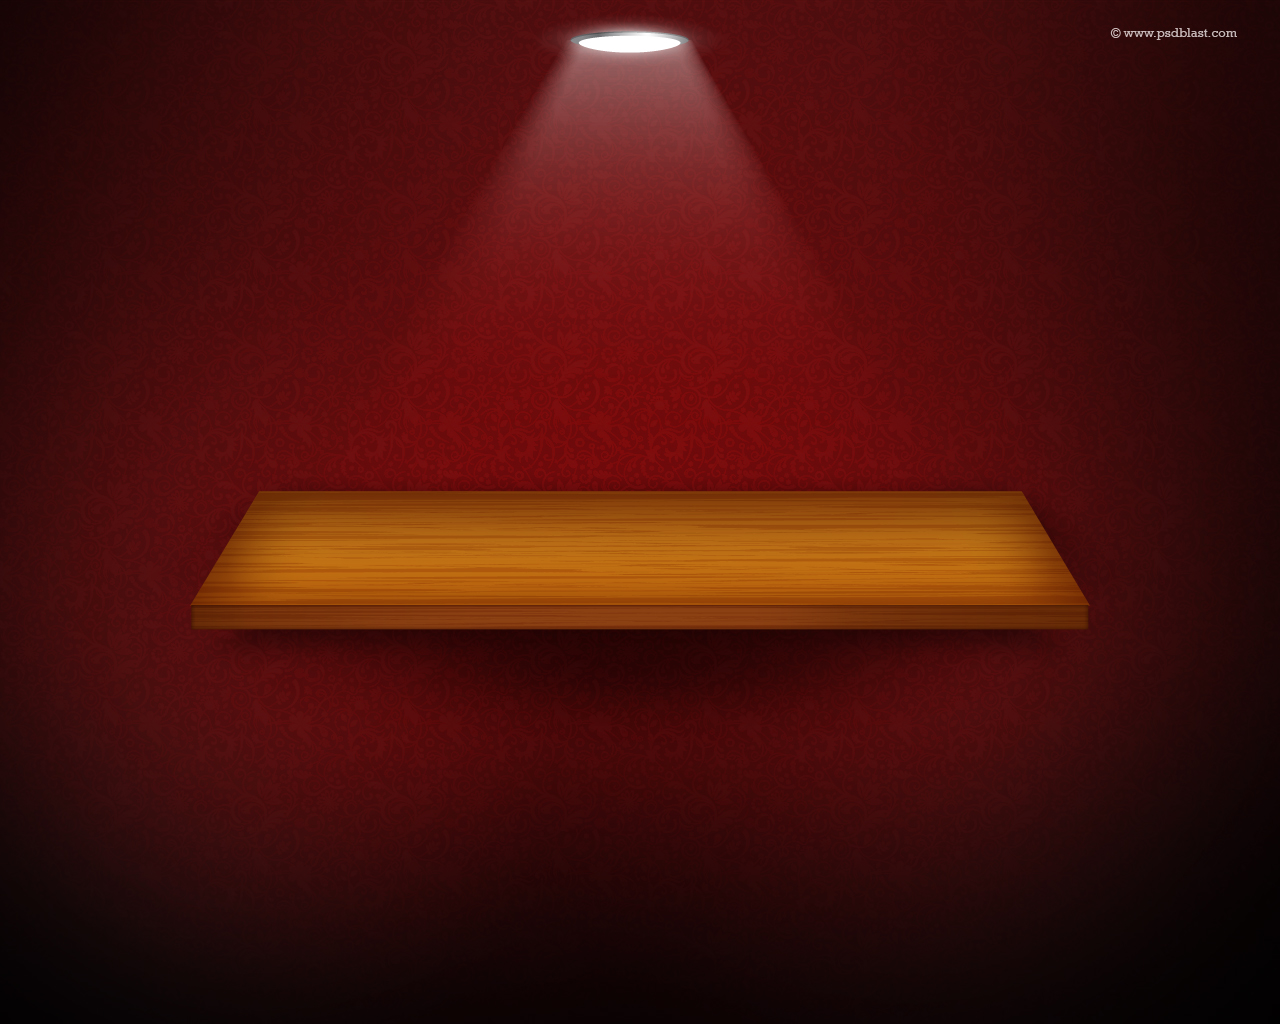  3d Isolated Empty Shelf for Exhibit on Red Wallpaper Background